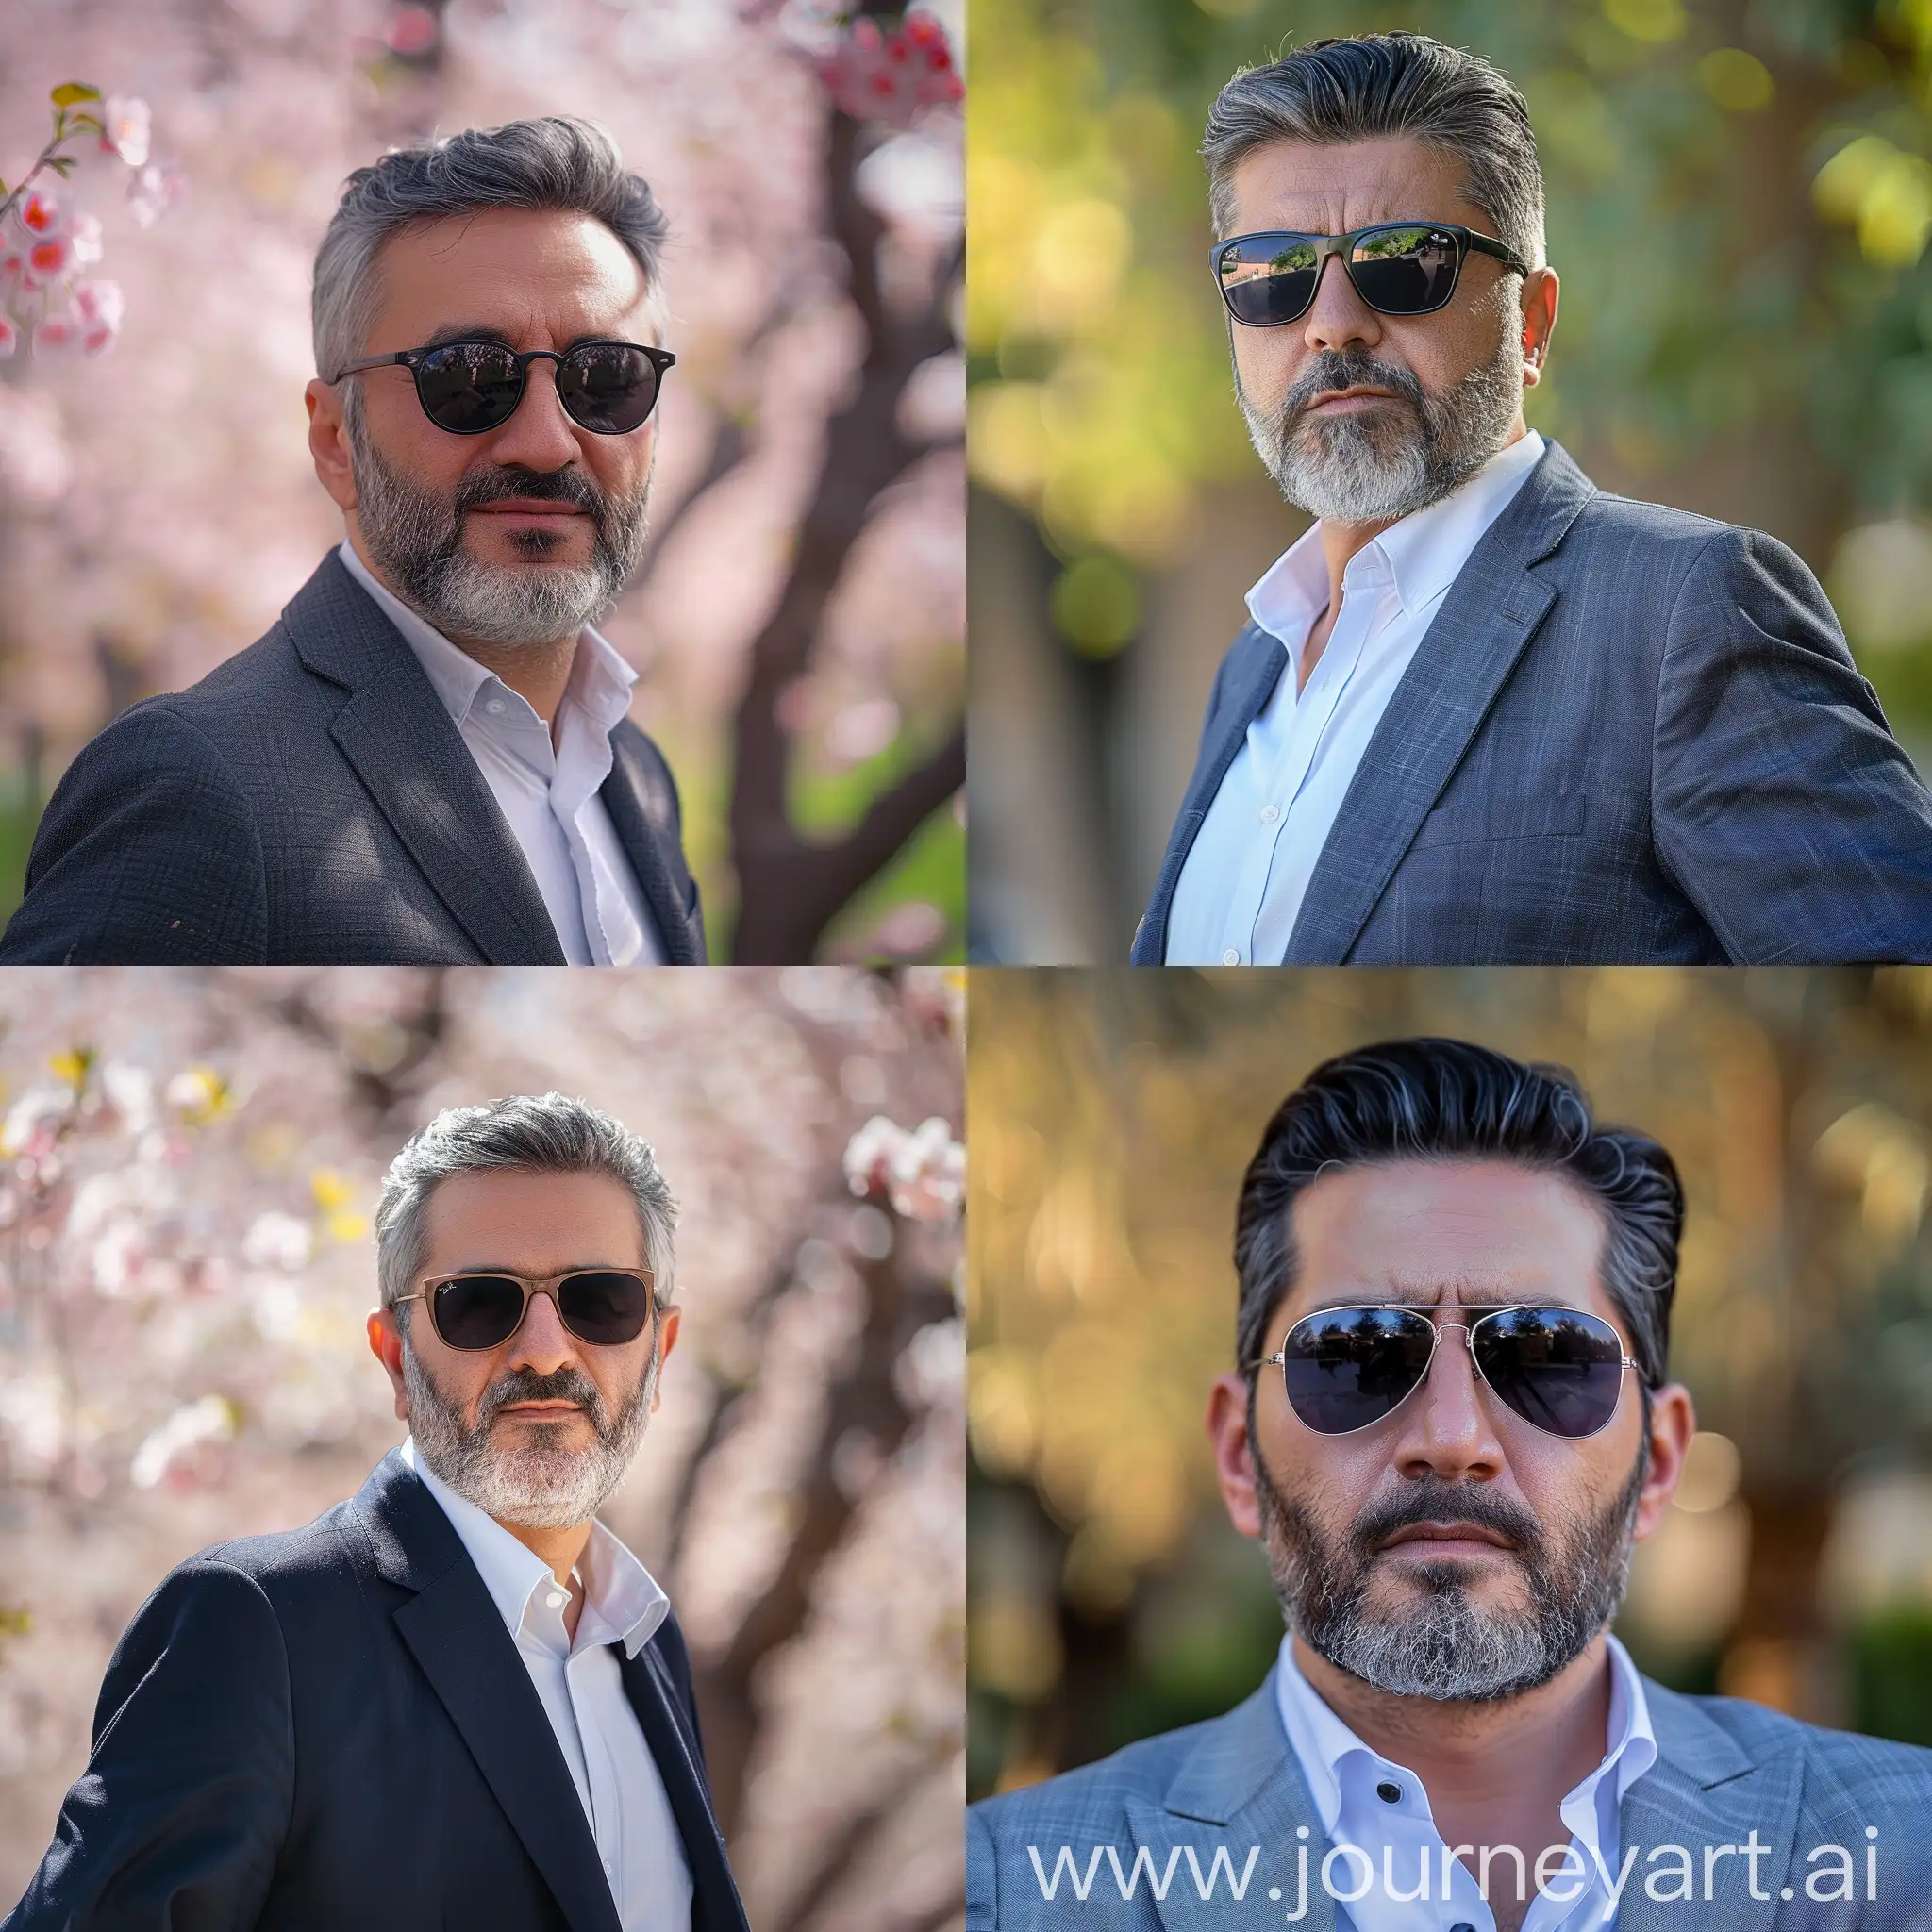 Real photo with natural light of Iranian company manager with sunglasses in spring.